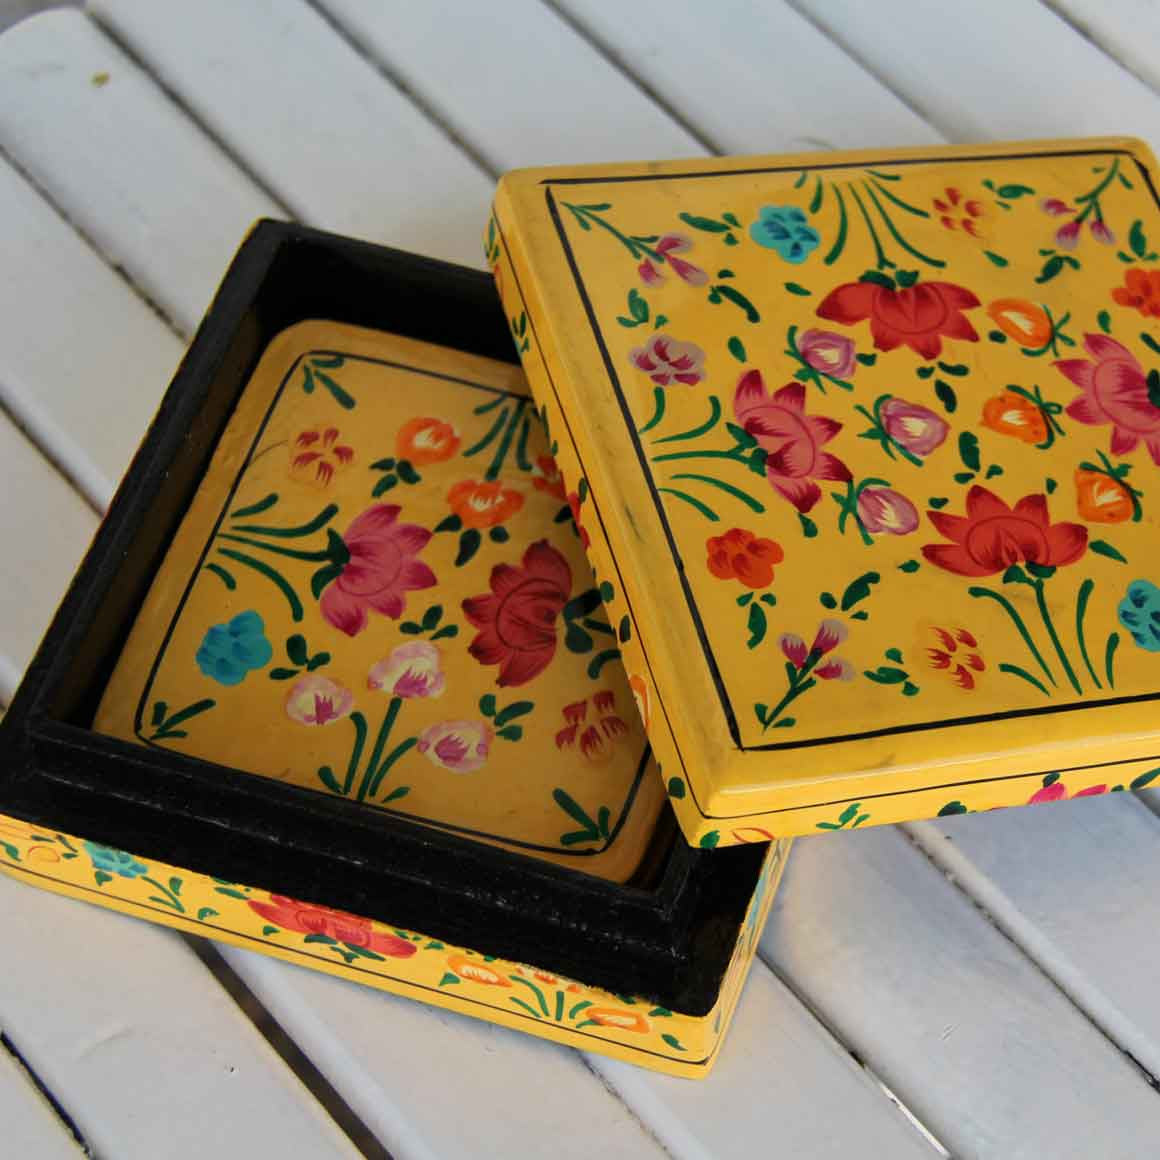 Fair Trade Ethical Homewares and Decoration Square Wooden Coaster Set Yellow Flowers